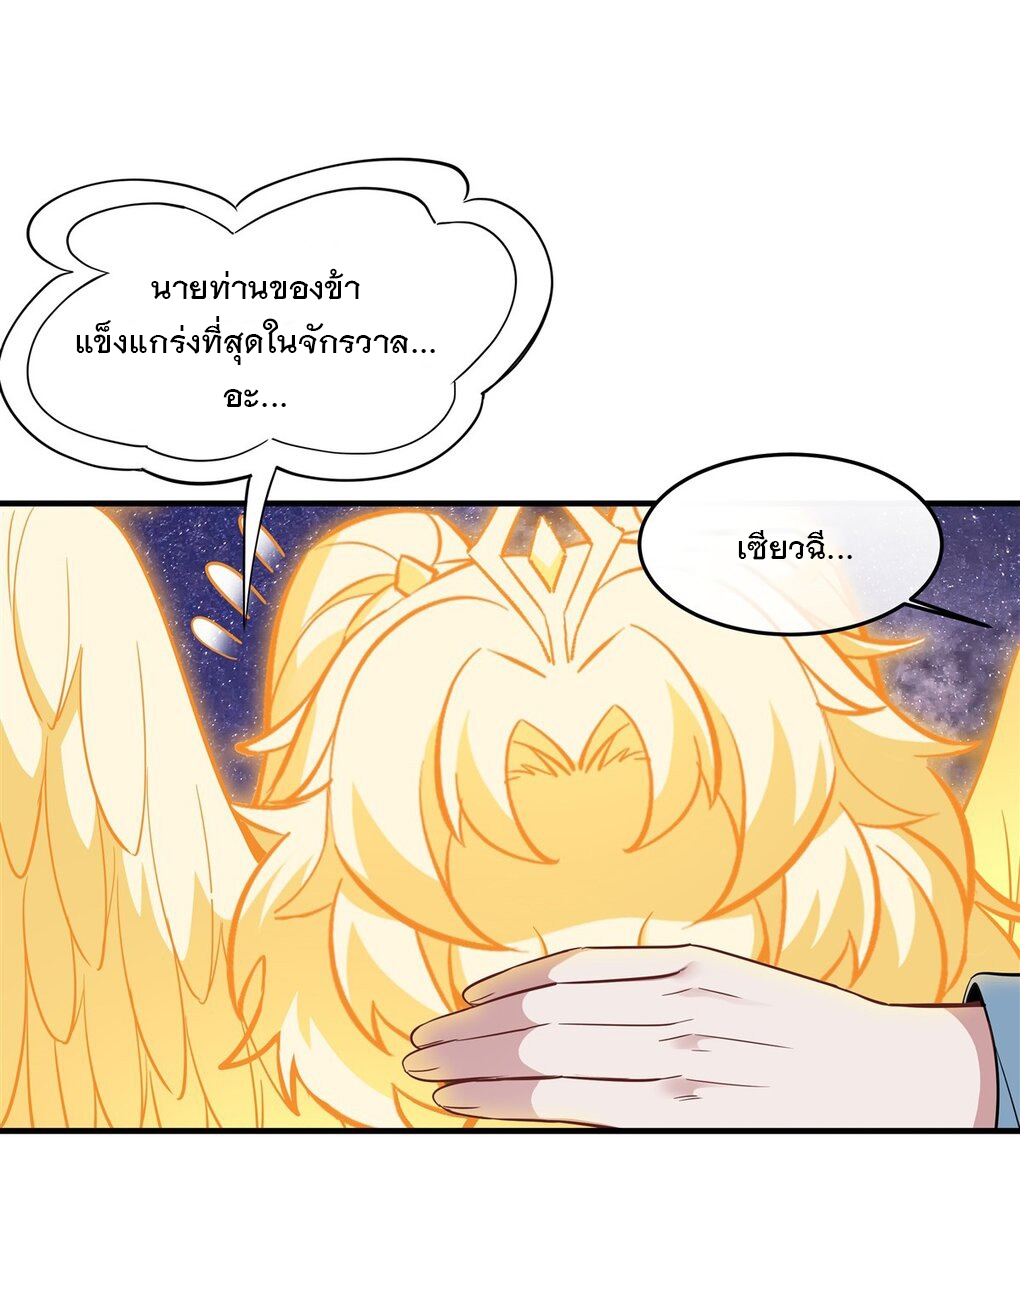 My Female Apprentices Are All Big Shots From the Future Ã Â¸â€¢Ã Â¸Â­Ã Â¸â„¢Ã Â¸â€”Ã Â¸ÂµÃ Â¹Ë† 93 (33)